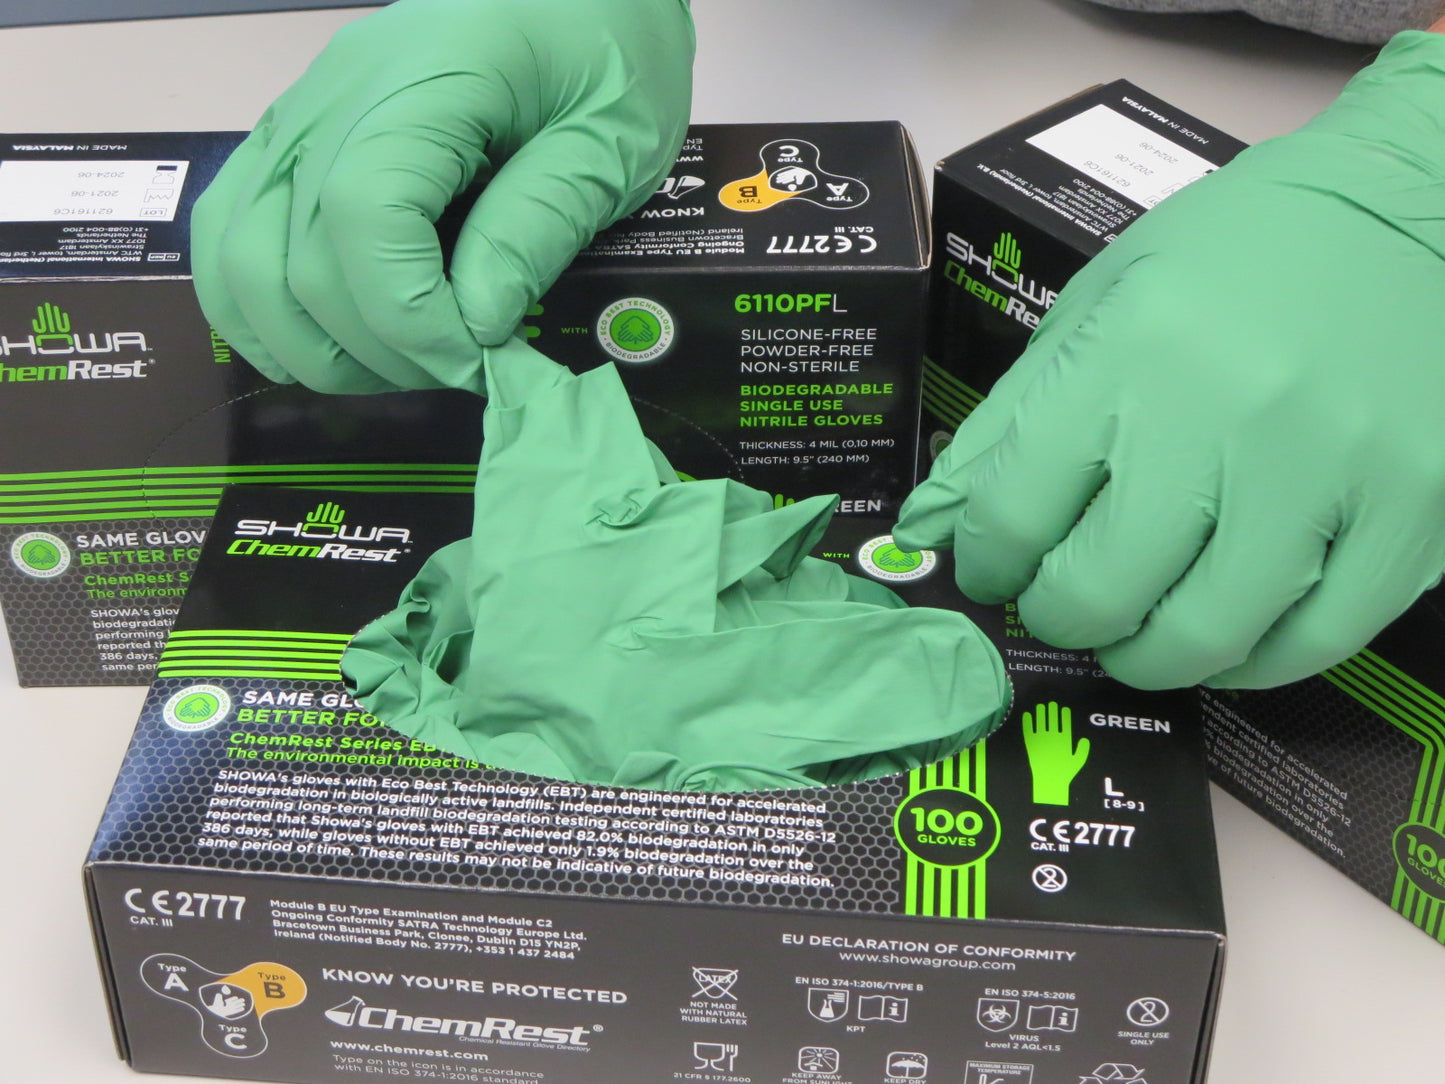 Showa® 6110PF Single-Use 4-mil Green Powder-Free Nitrile Gloves with EBT Eco-Best Technology® brings you the world's first biodegradable disposable nitrile glove. Packed 100 gloves per dispenser box. 